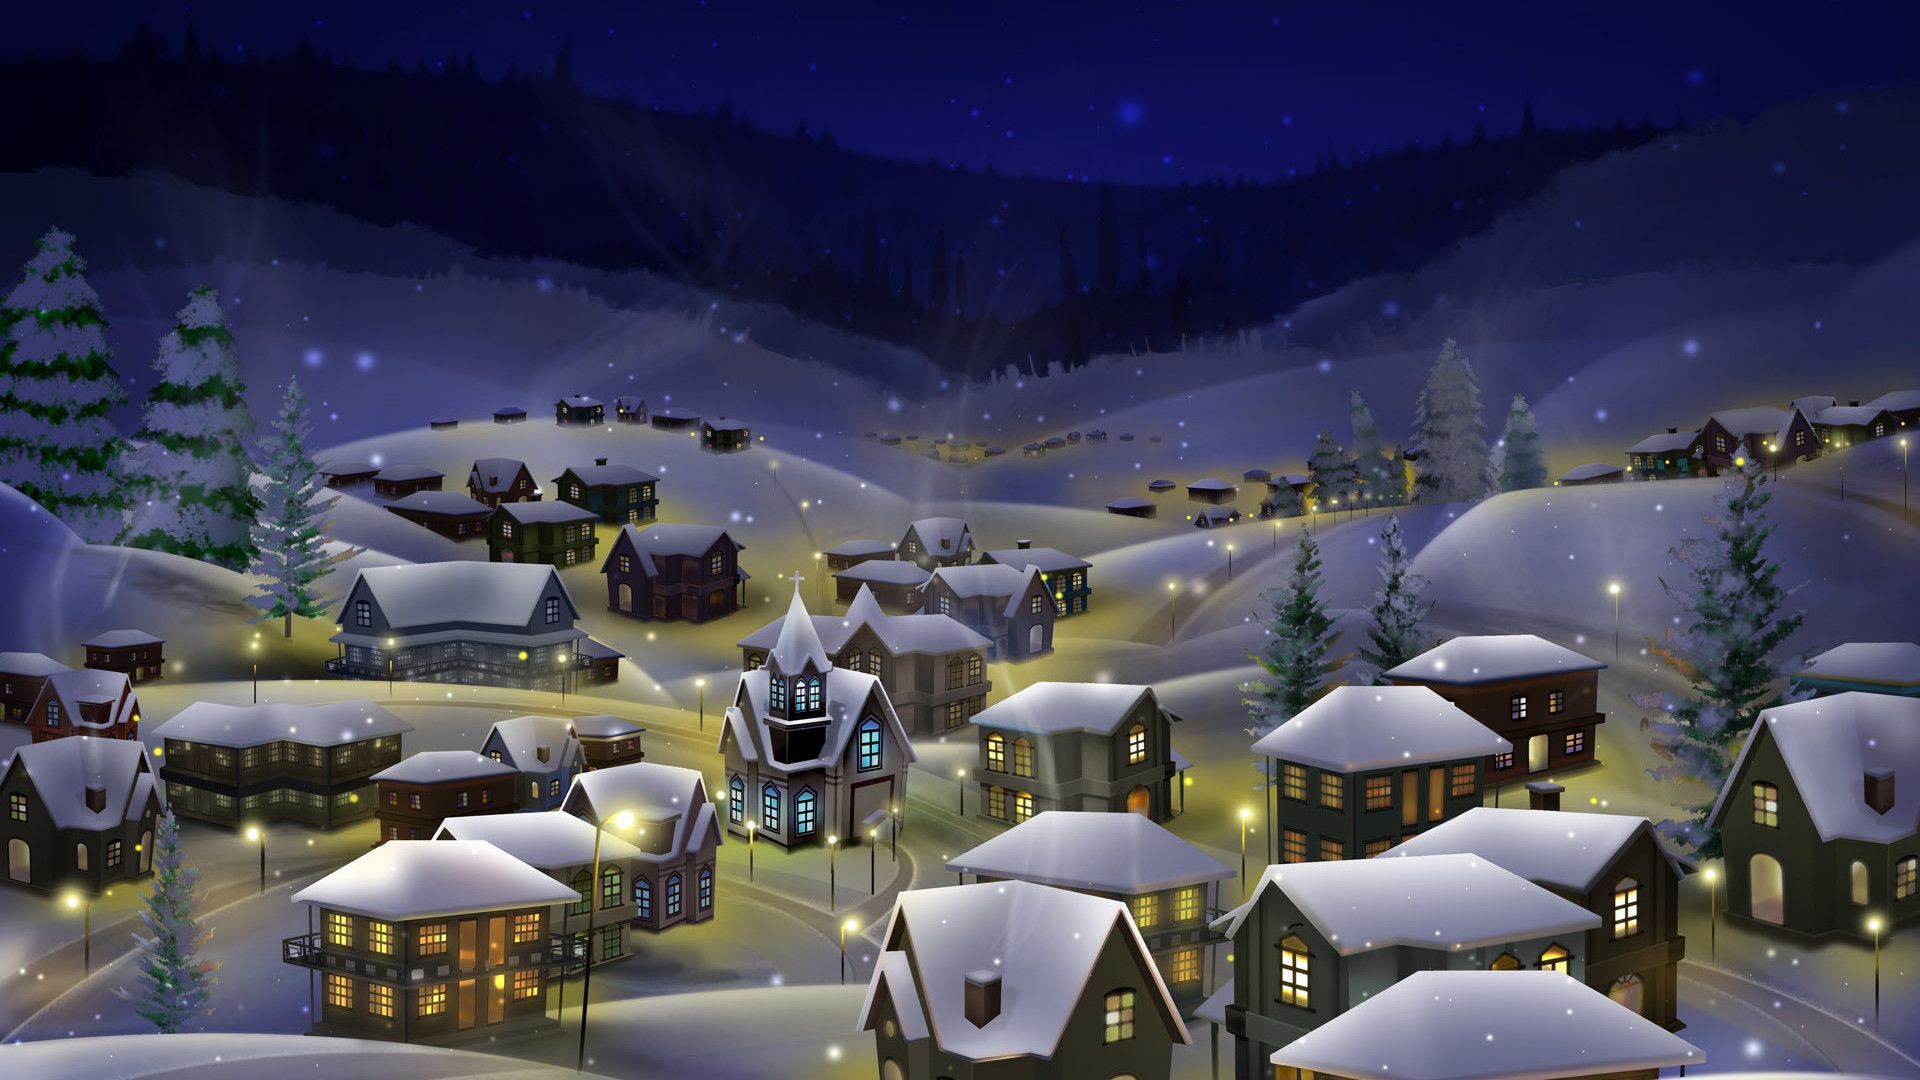 Wallpaper Download 1920x1080 Winter drawing covered with snow in the night. Drawings,. Christmas village display, Christmas wallpaper hd, Christmas village